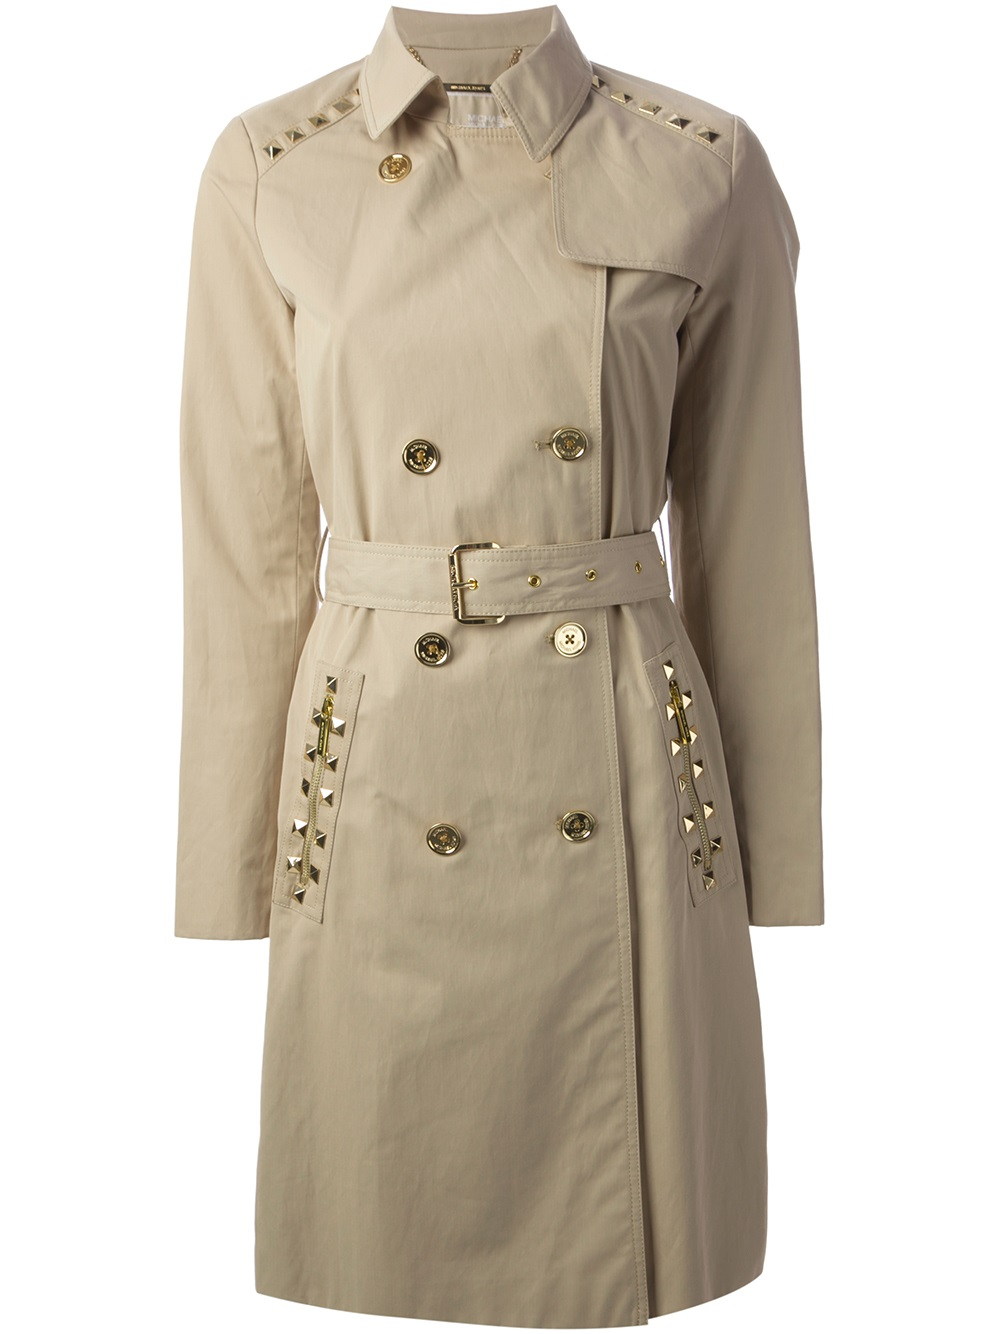 Lyst - Michael Michael Kors Studded Trench Coat in Natural